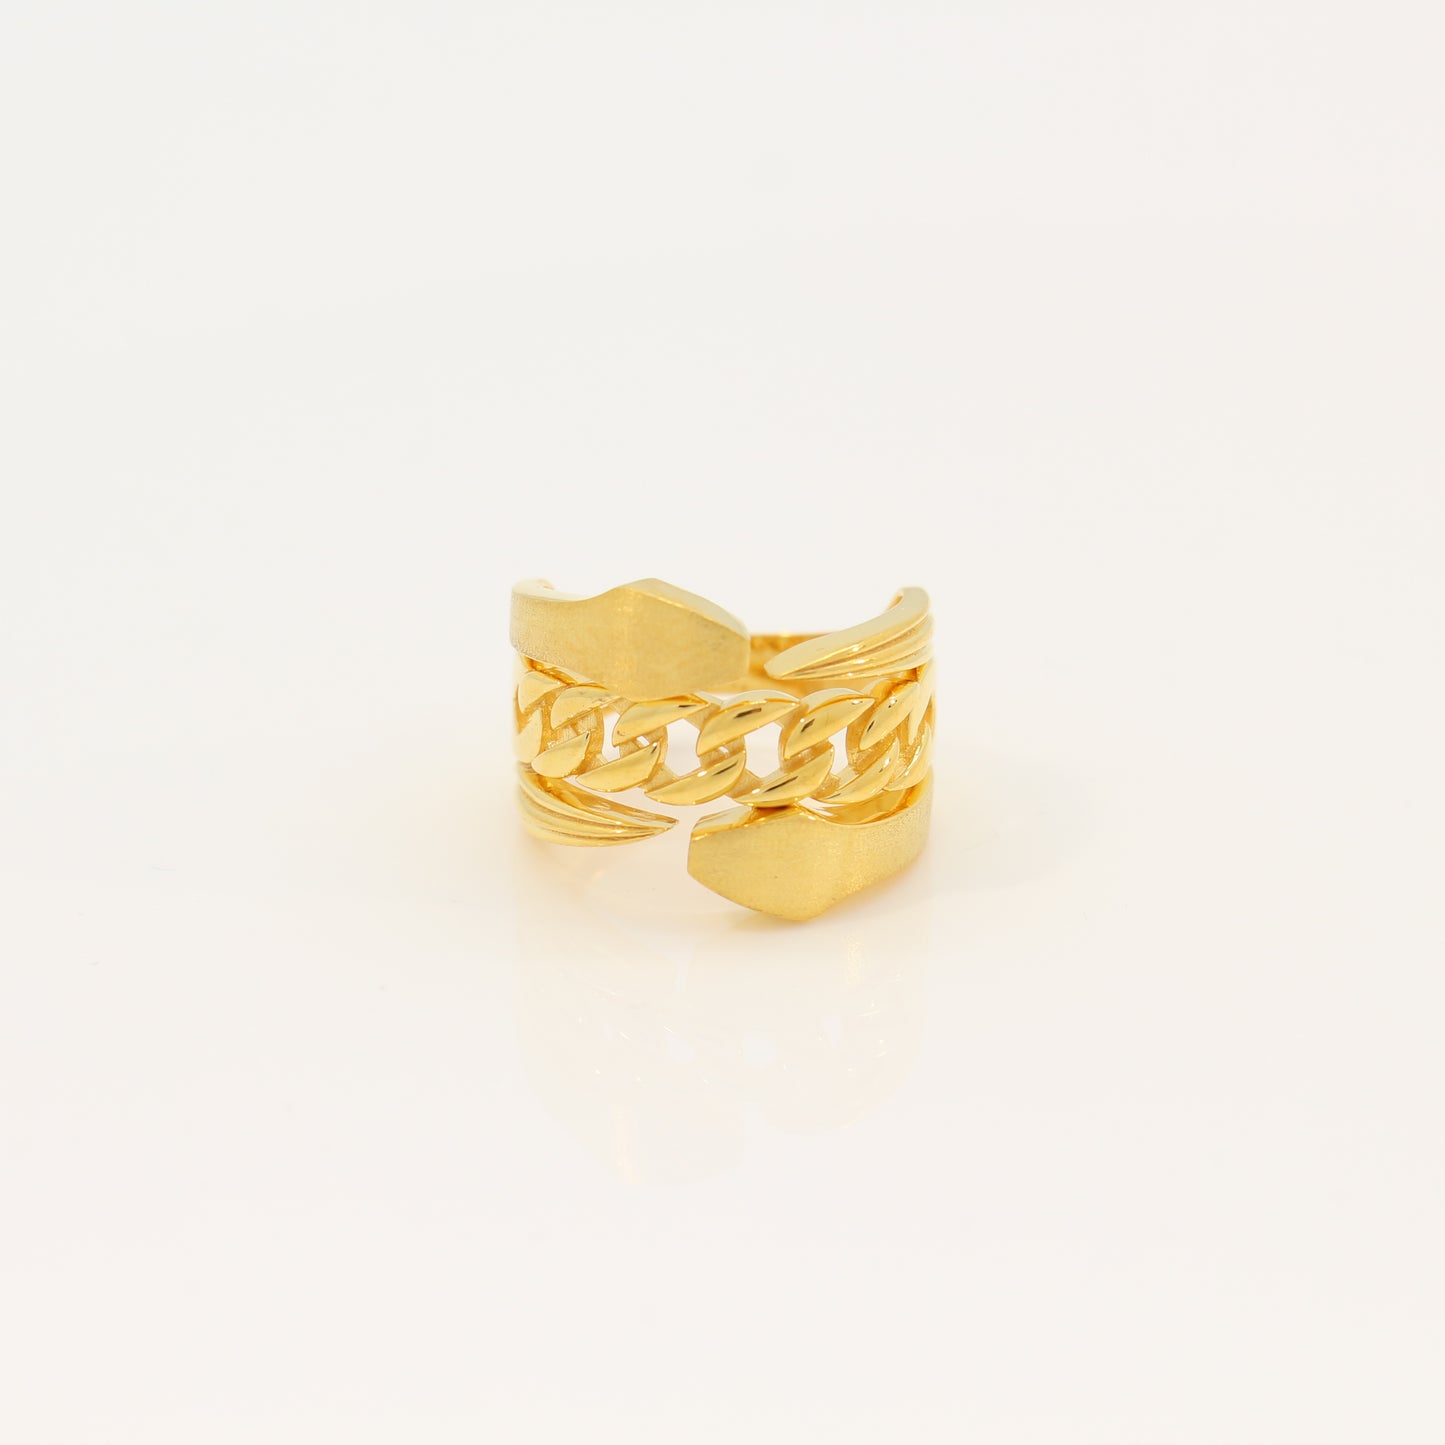 Copy of 21K Gold Ring (size 6.5/8)